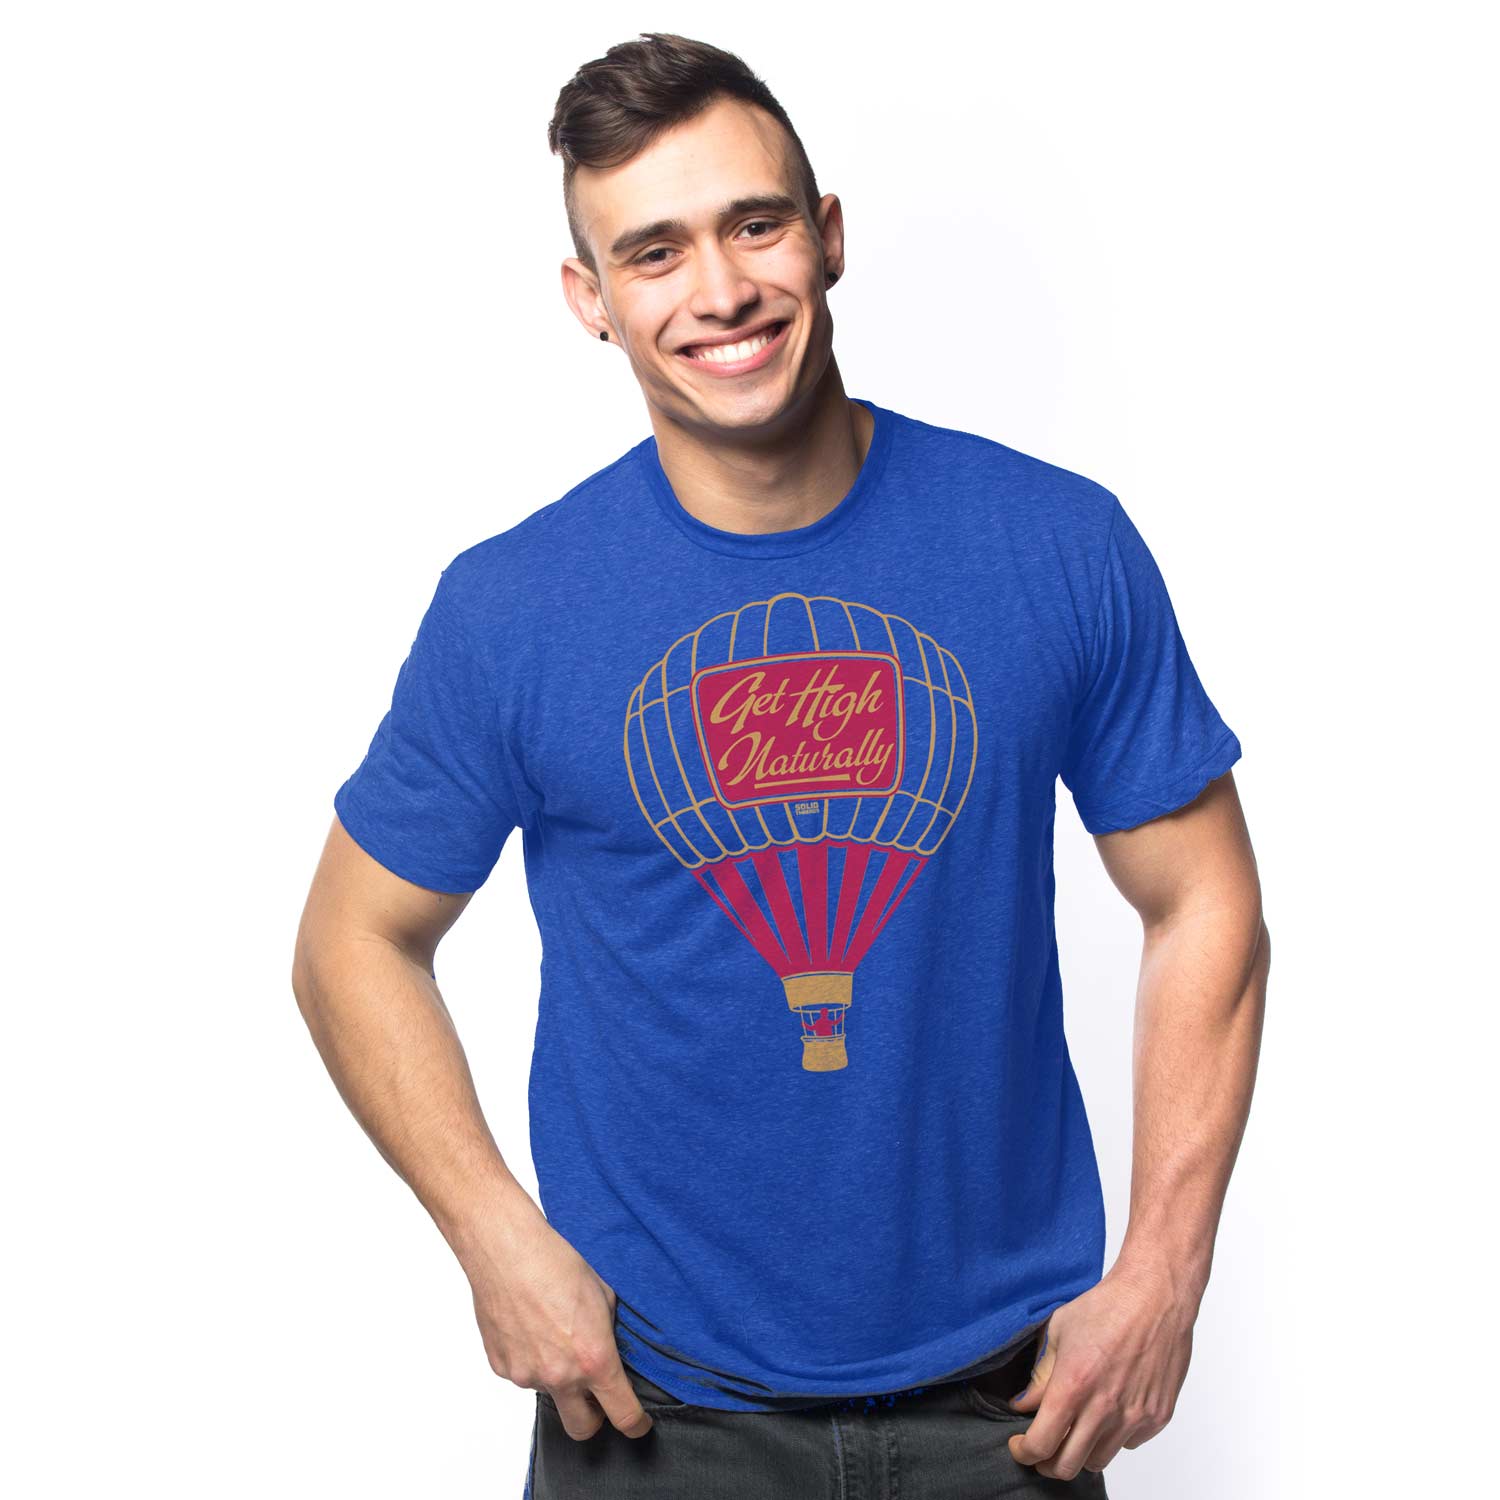 Men's High Naturally Retro Hot Air Balloon T-shirt | Cool 420 Graphic Tee on Model | Solid Threads